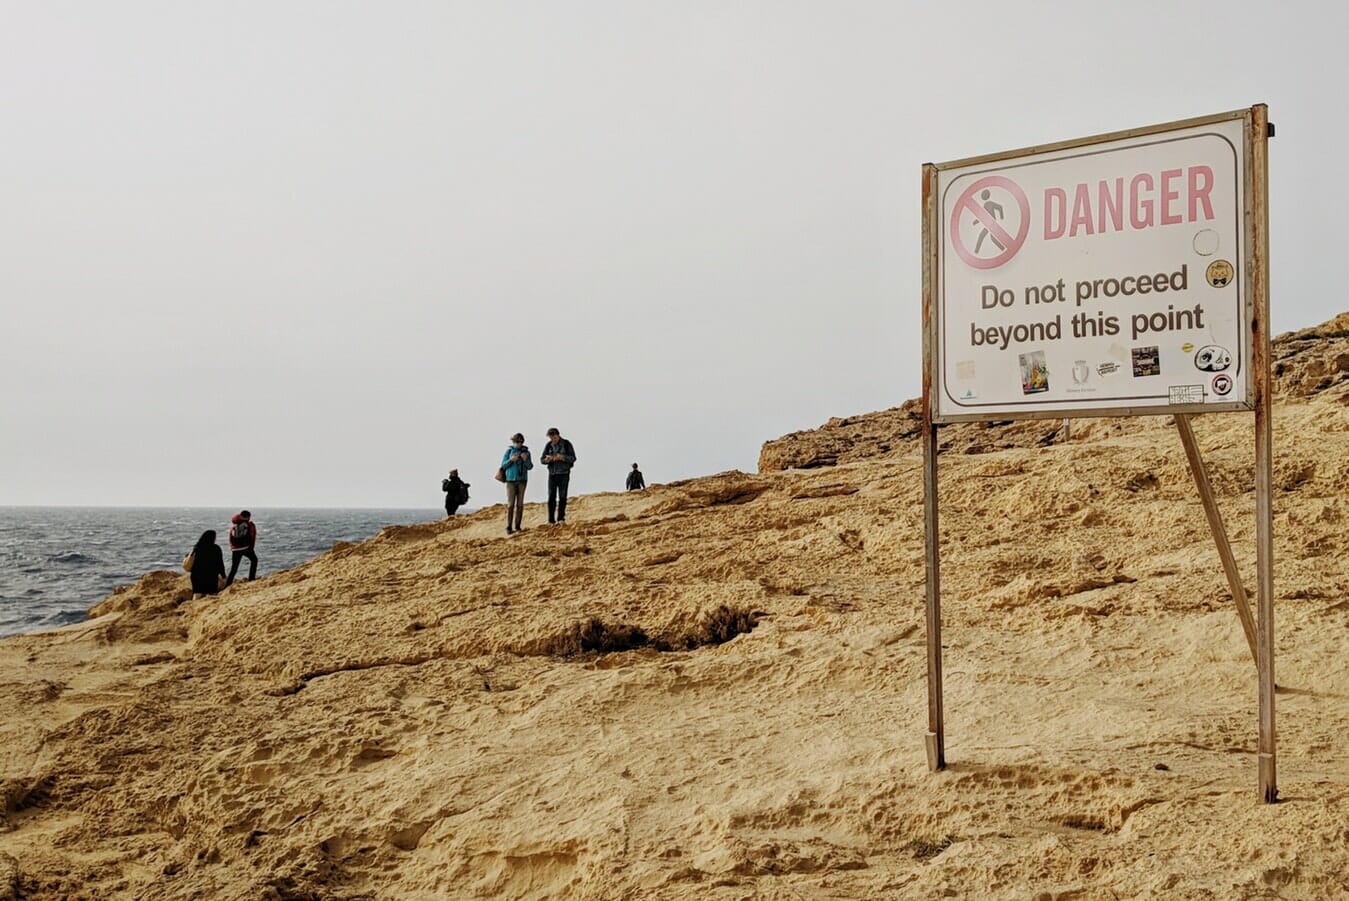 A sign on a cliff warning people of danger.